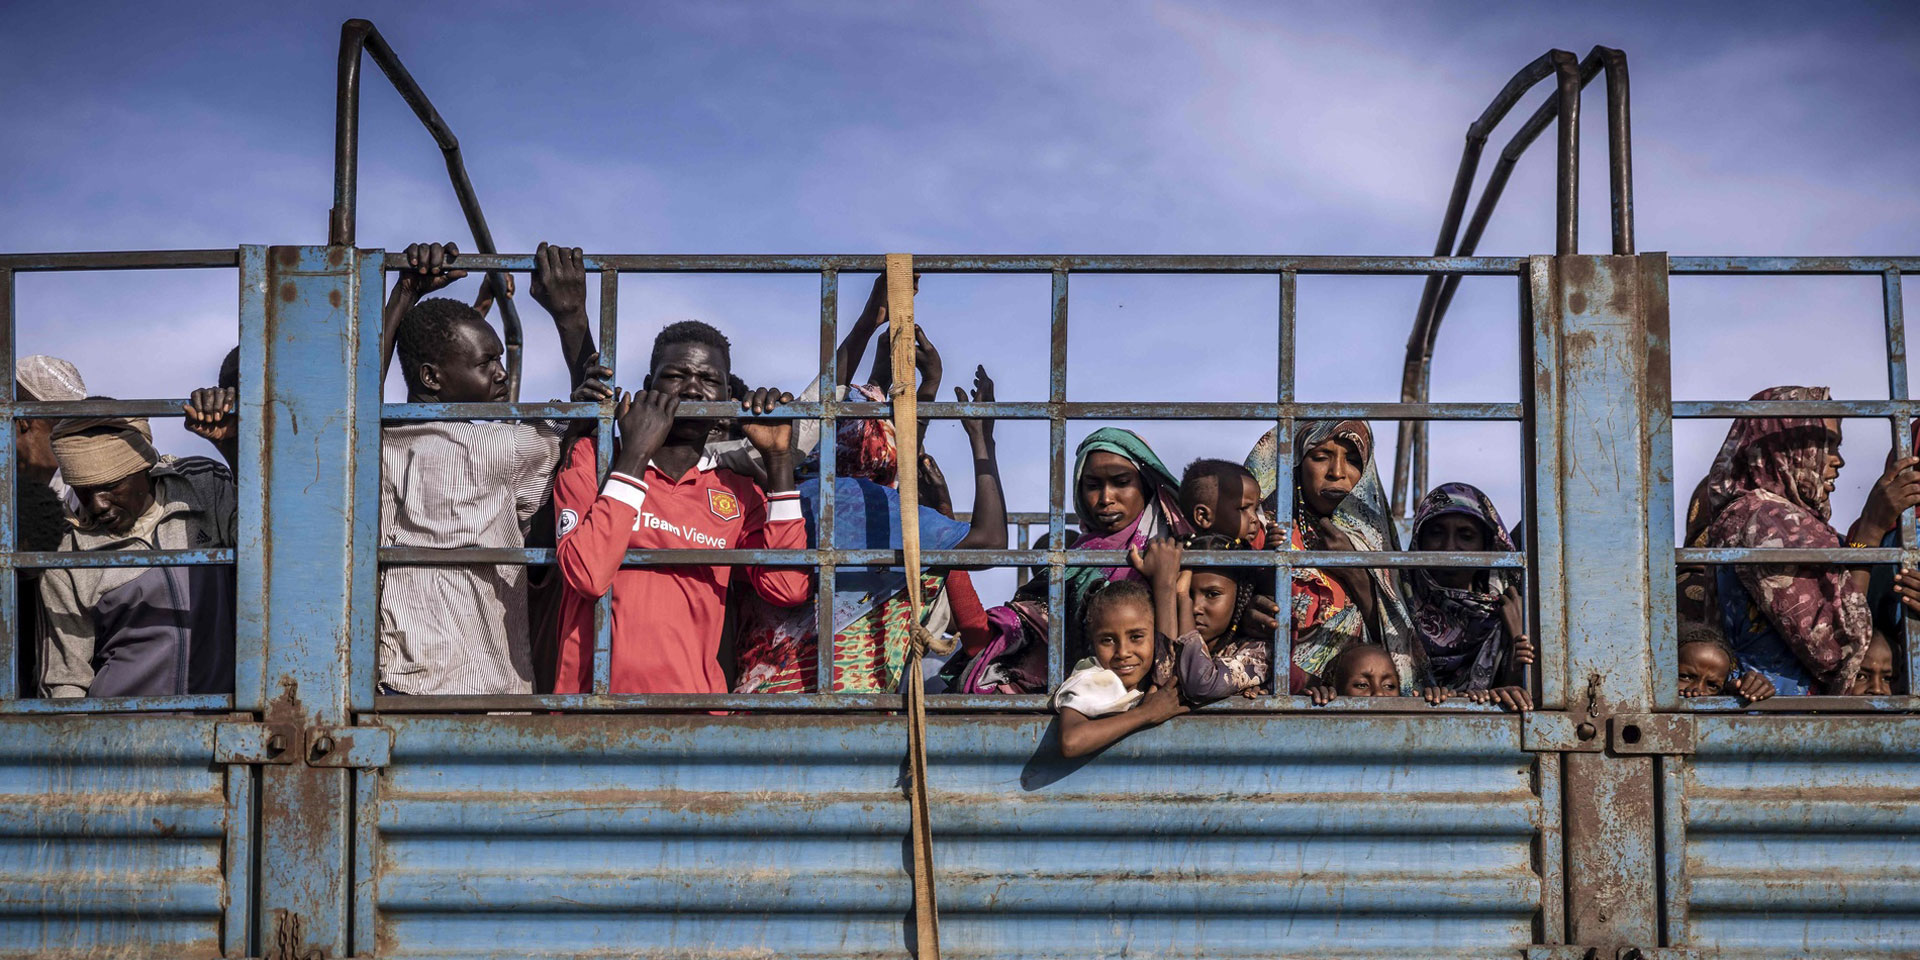 Sudanese women, men and children stand close together on the back of a blue lorry.